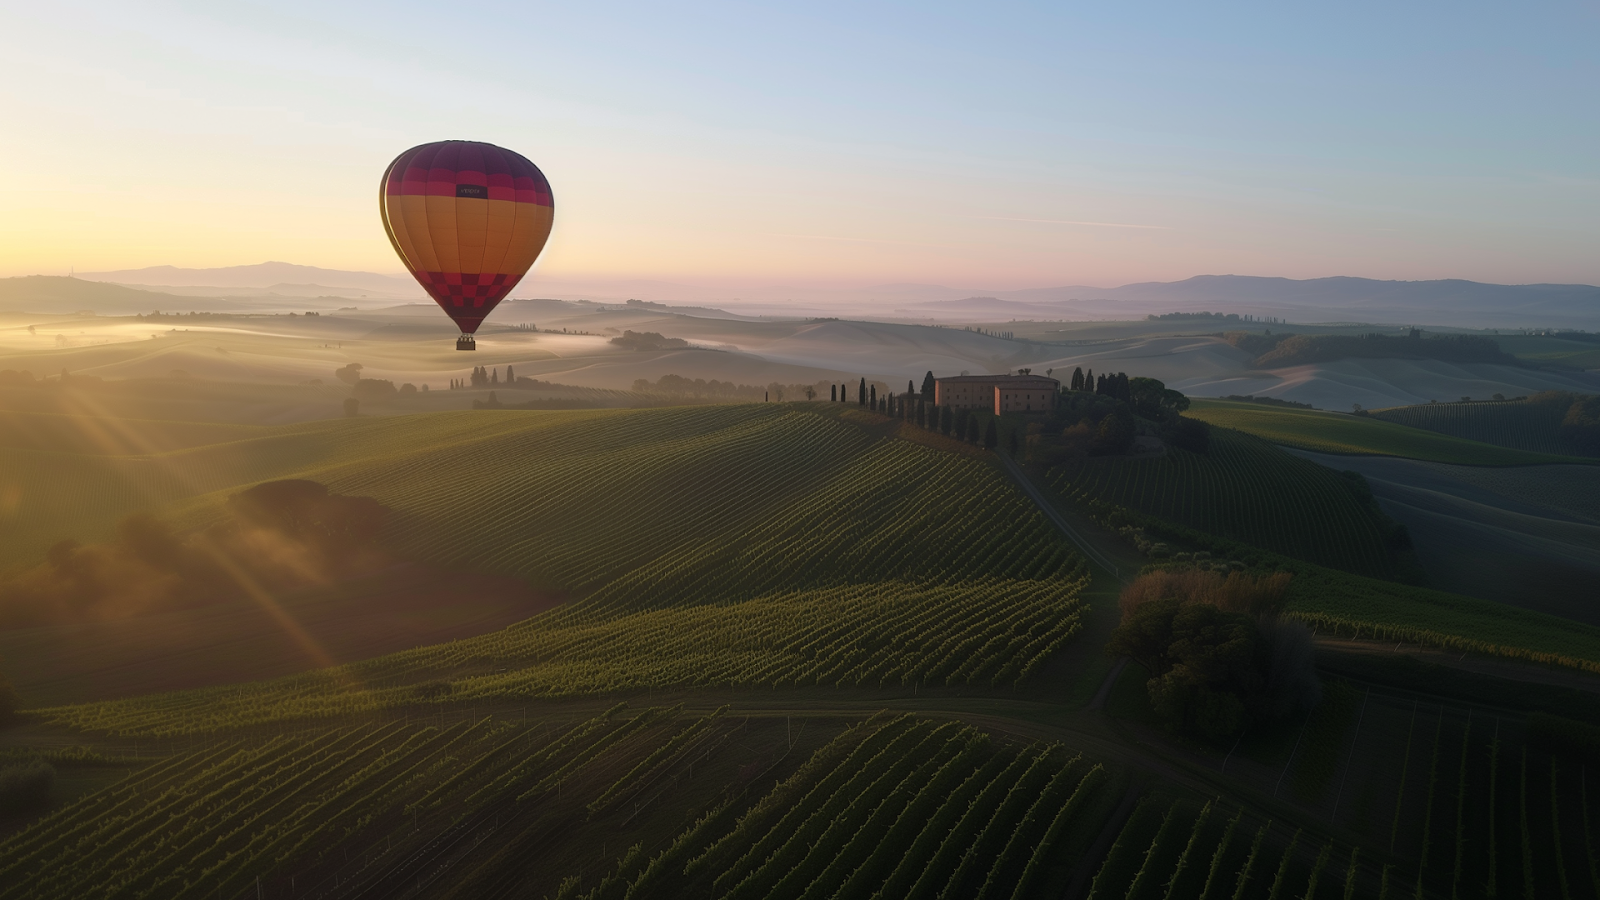 Sunrise hot air balloon ride over Tuscany's vineyard-covered hills.